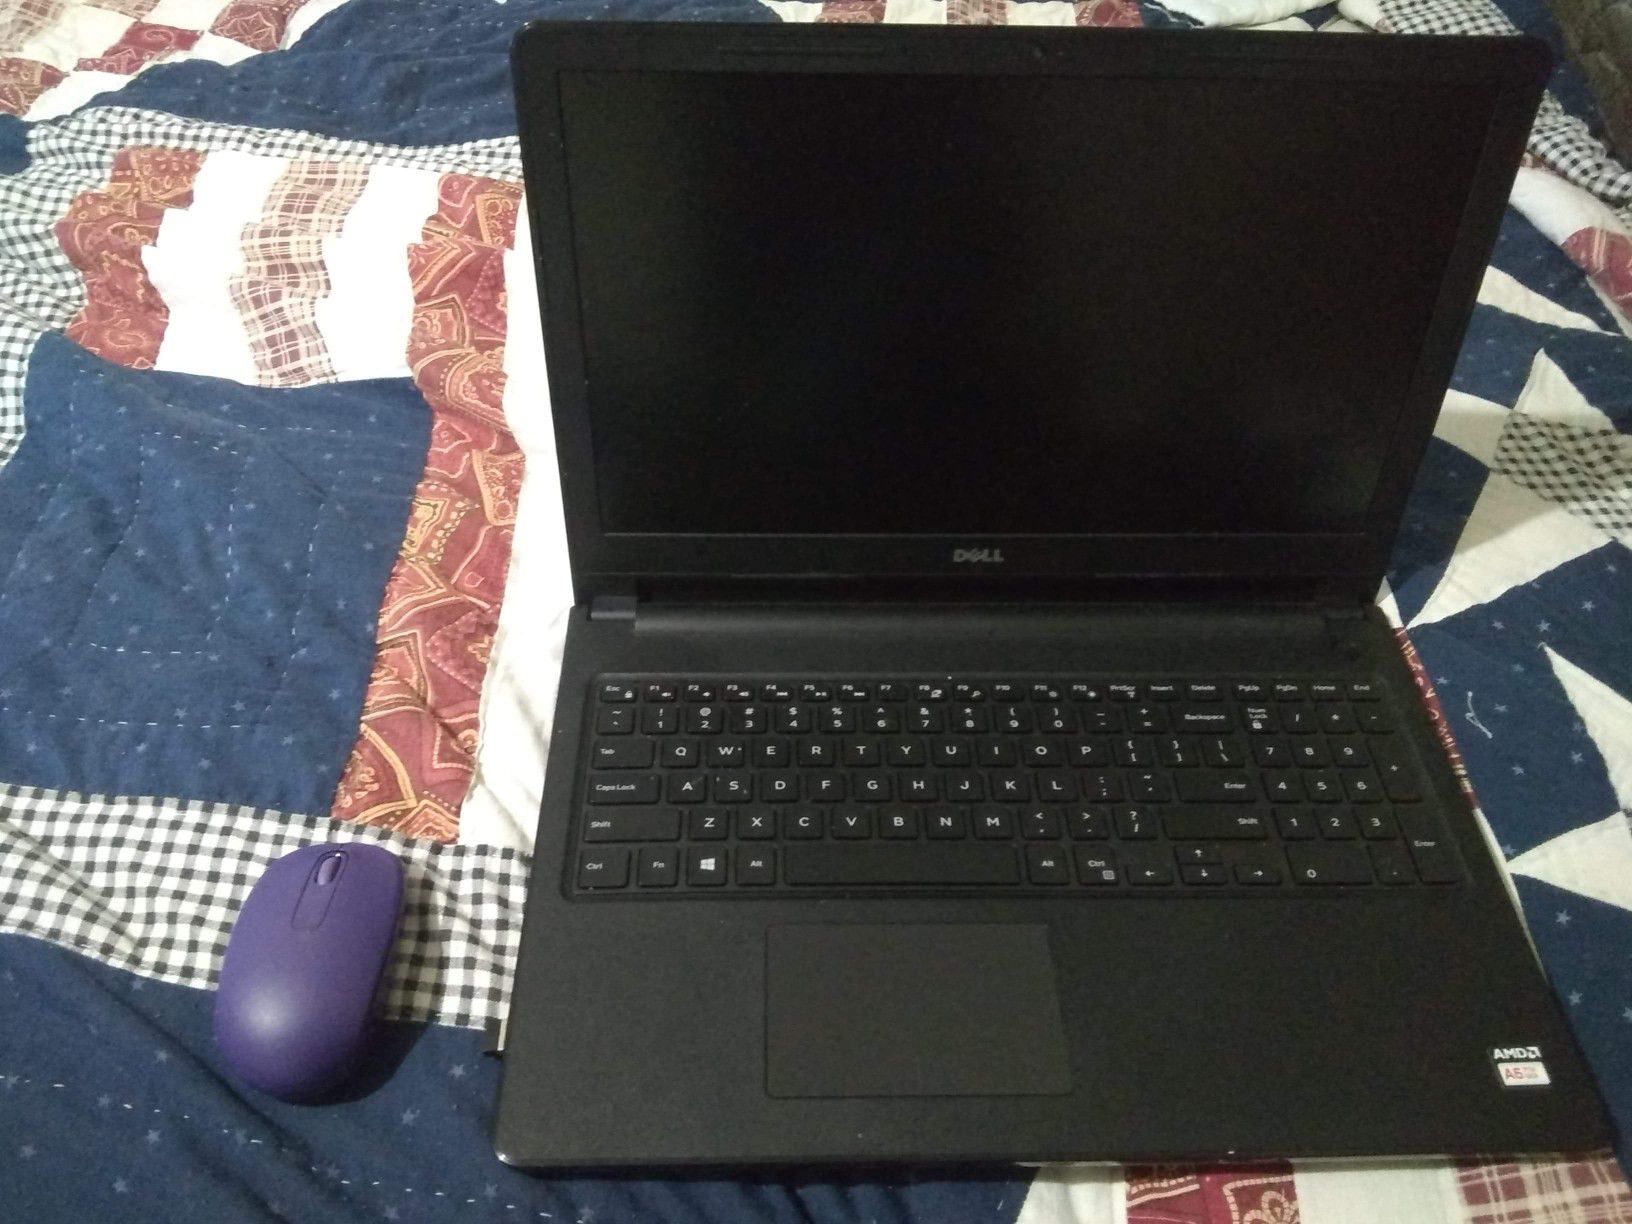 Dell laptop. Grate condition. Only has been used a few times.